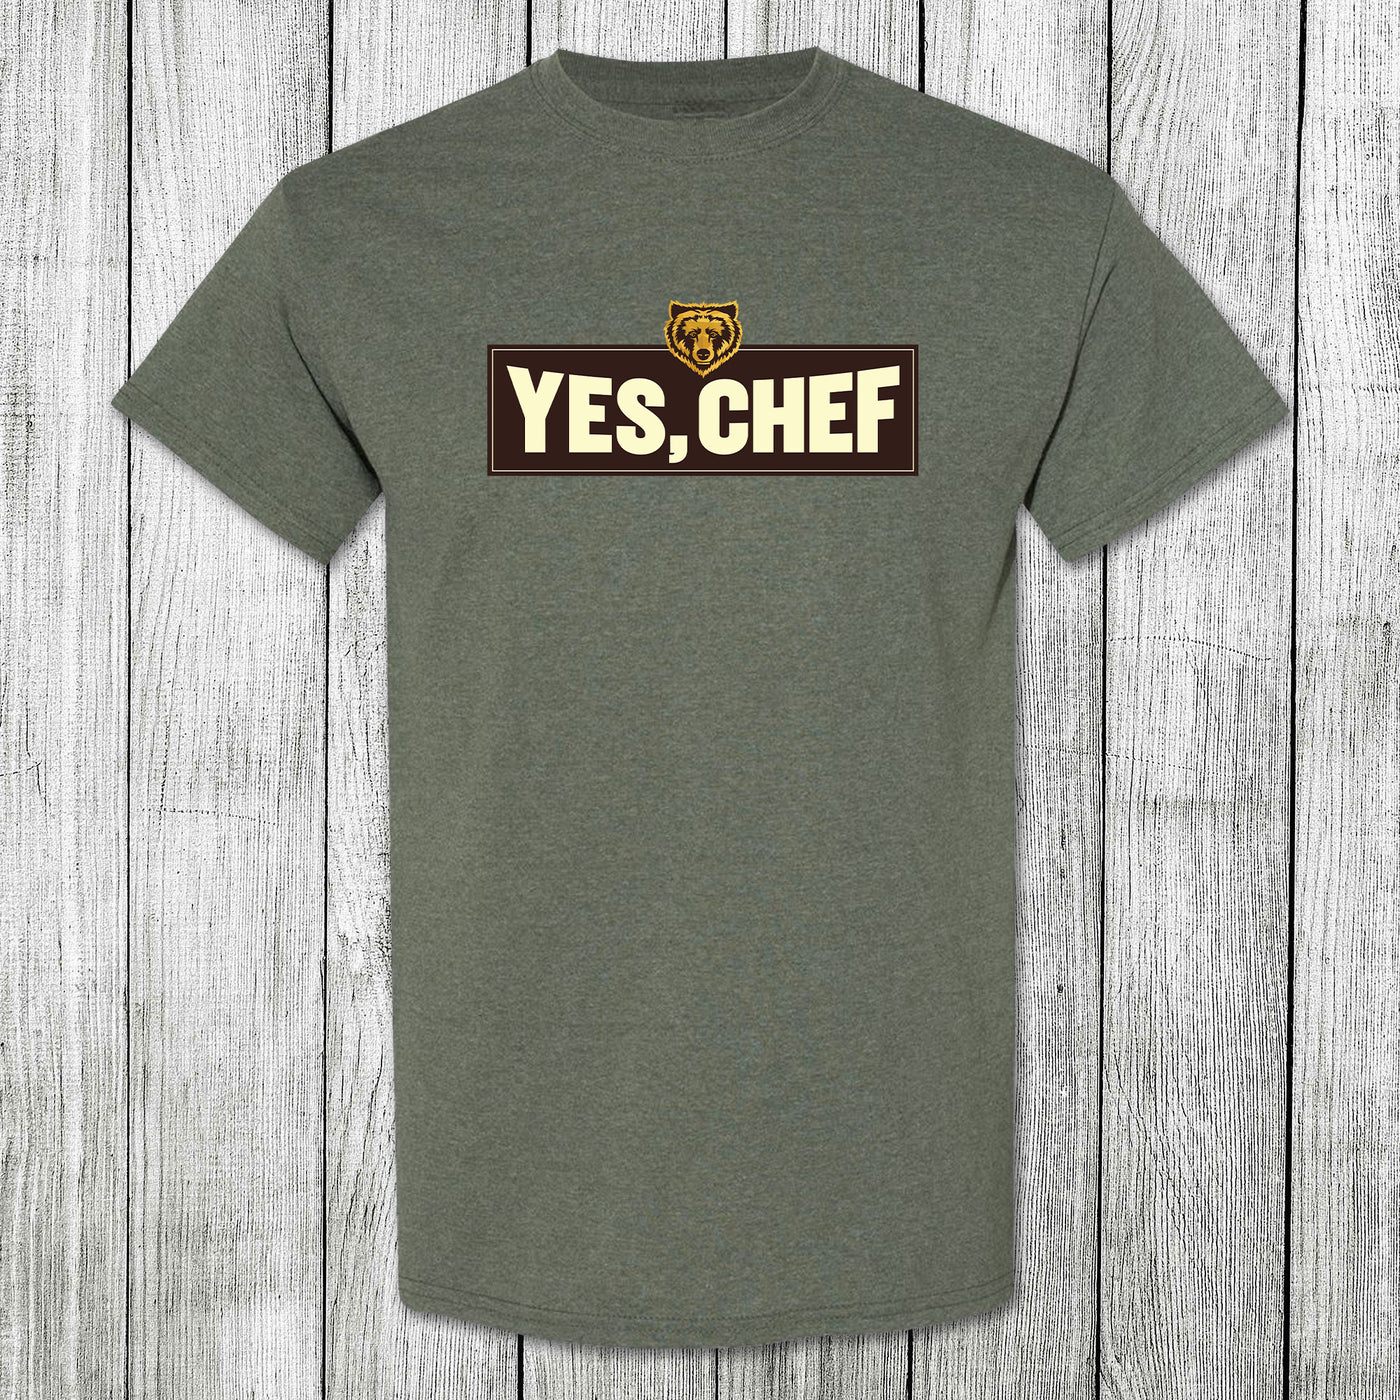 Daydream Tees Yes, Chef